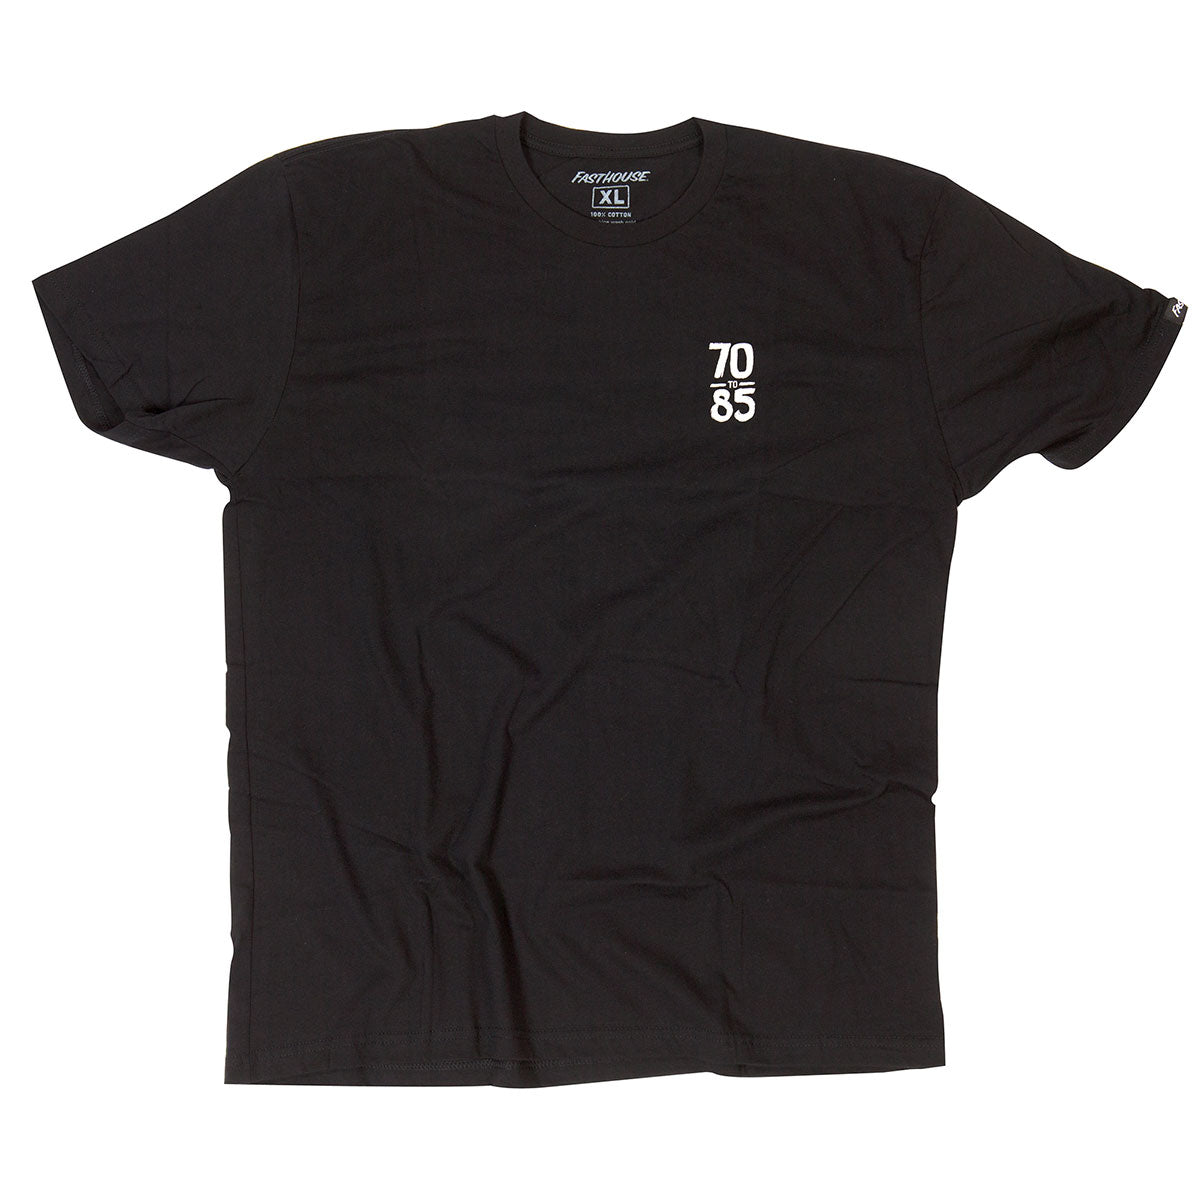 Fasthouse - Indian Dunes 126 Tee - Black